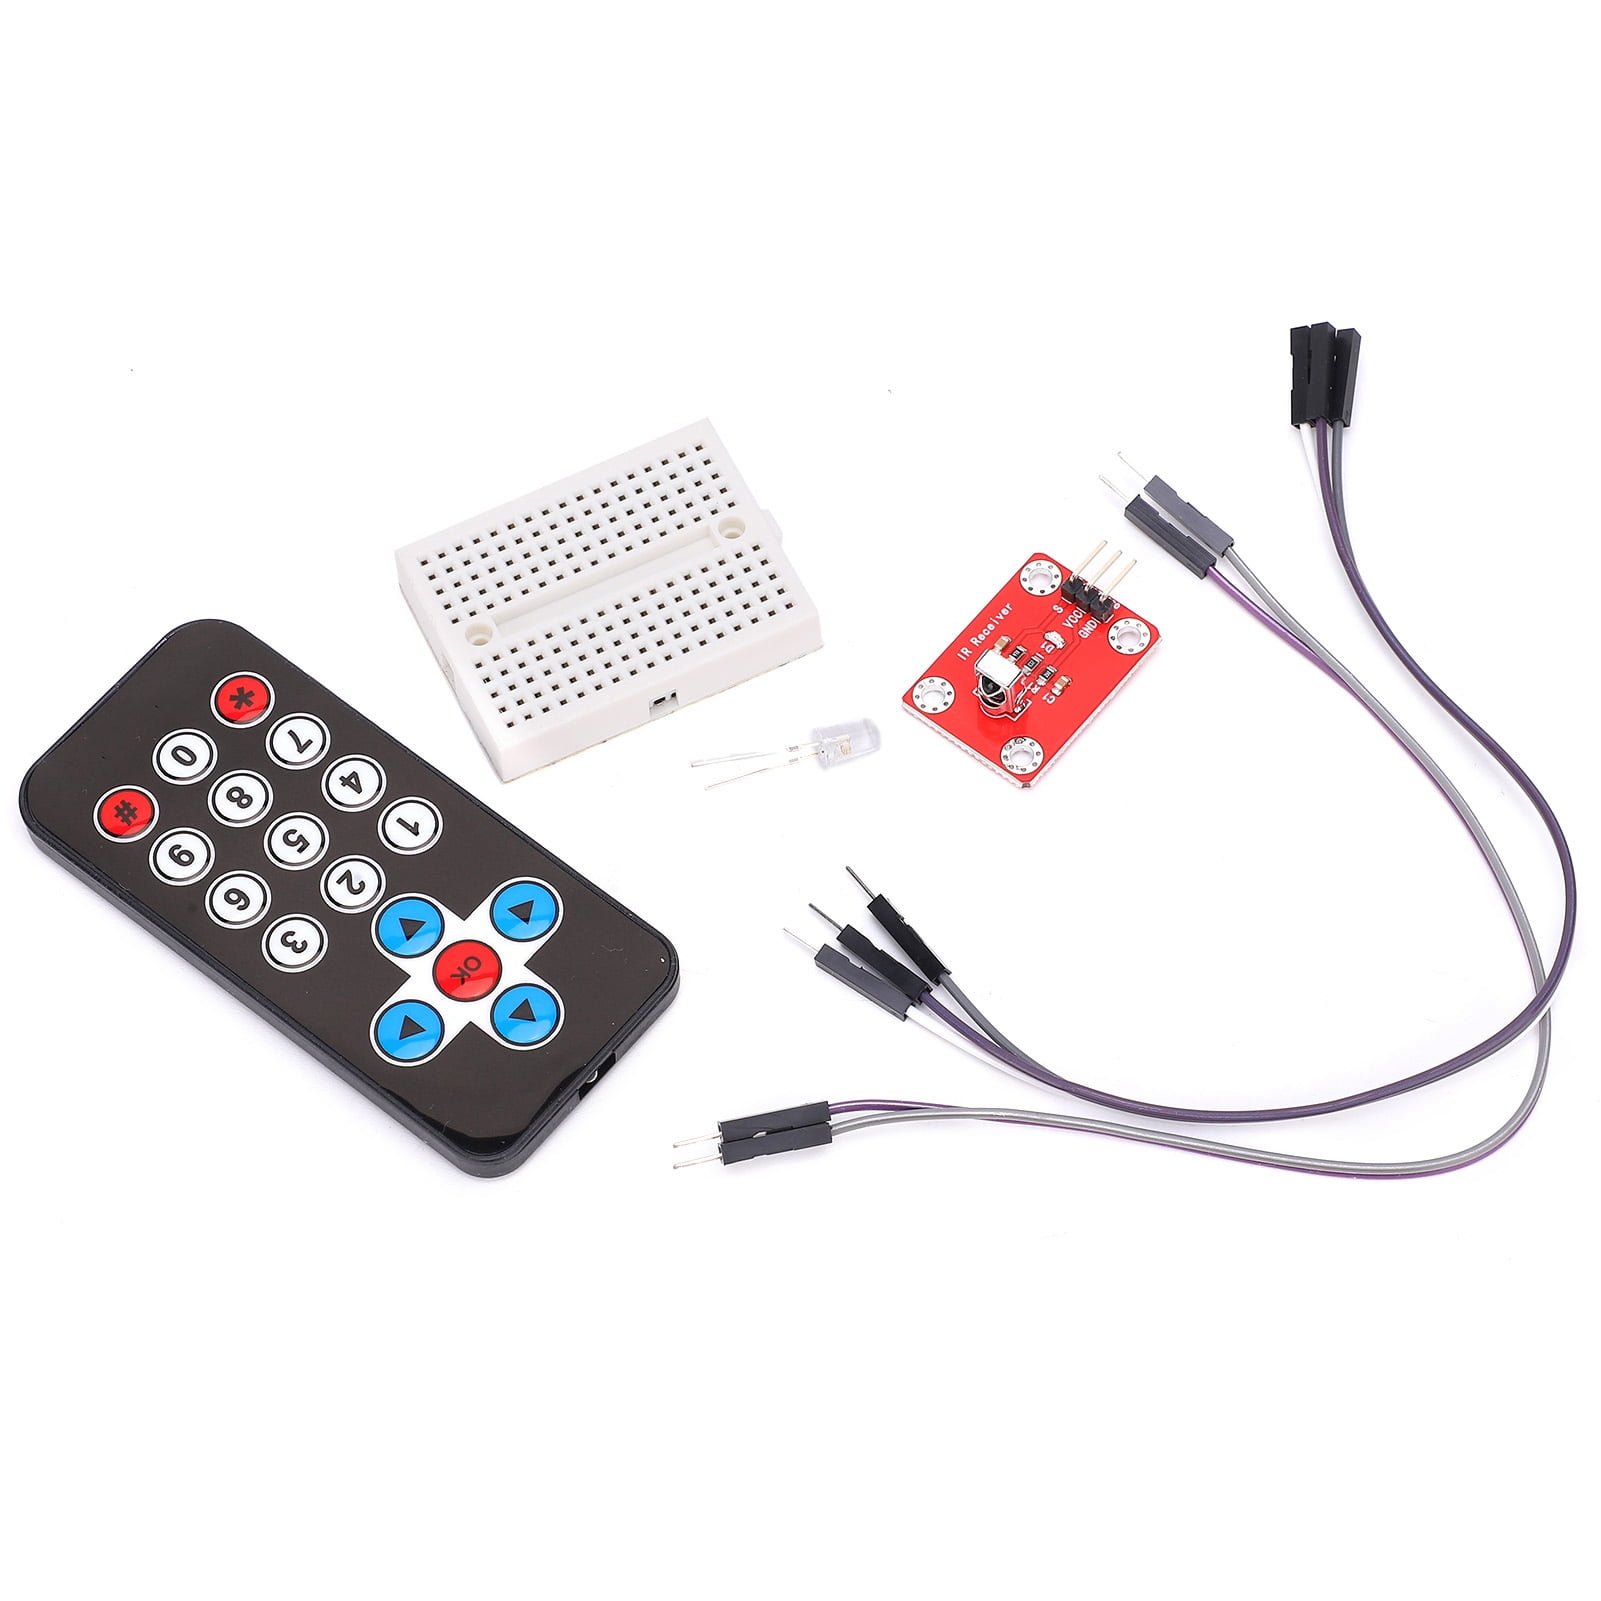 Details about   Infrared Control Kit Wireless Signal Receiving Board Remote Sensor VS1838B 940Nm 